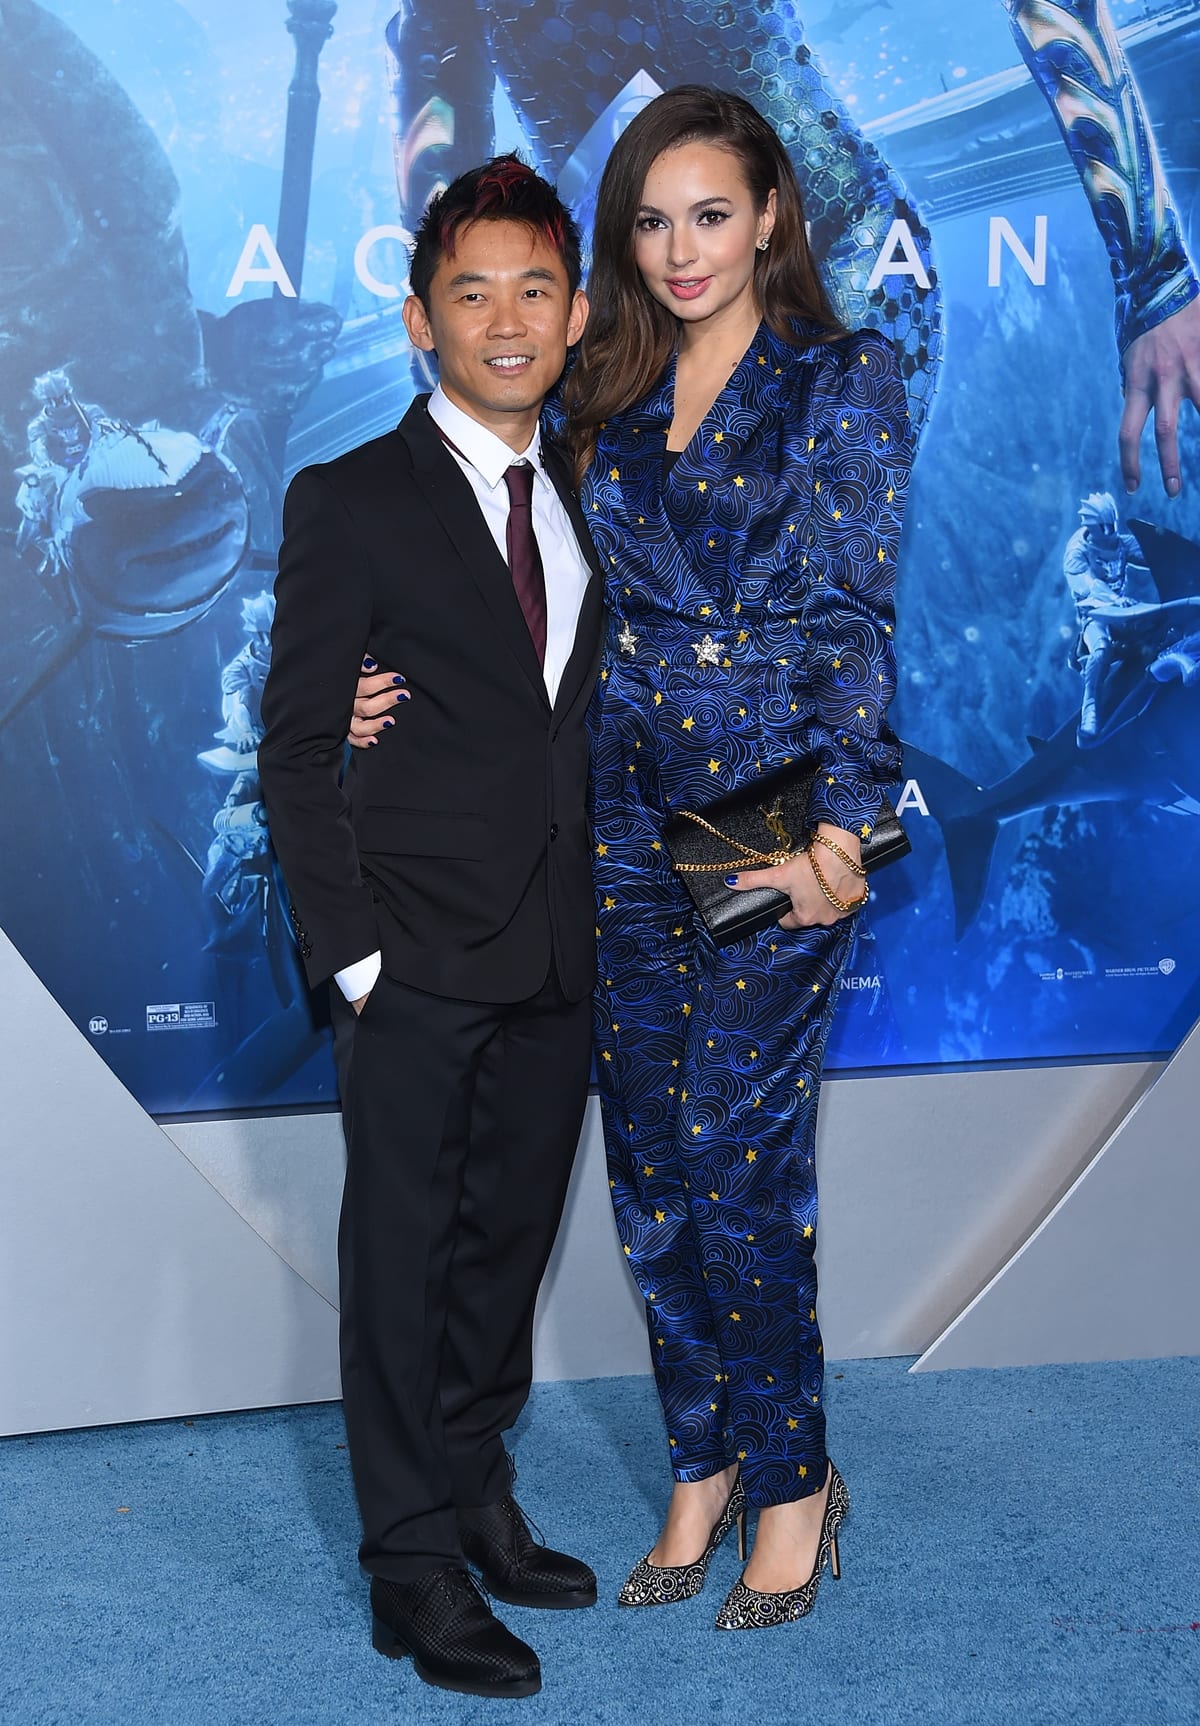 Director James Wan and his much taller wife Ingrid Bisu arrive for the Premiere Of Warner Bros. Pictures' "Aquaman"